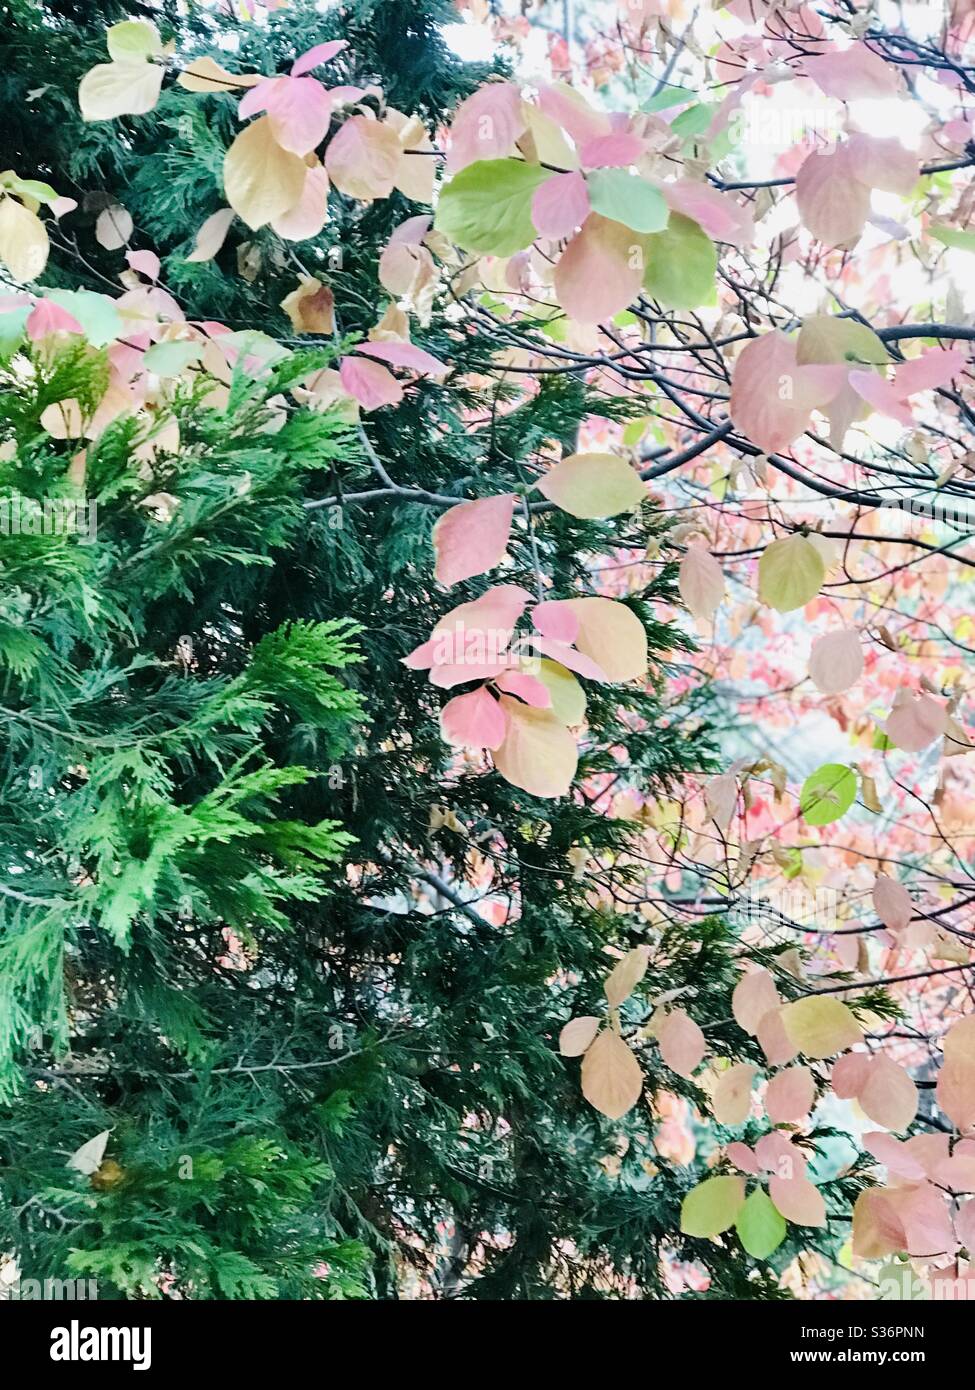 The contrast of colors of a green pine tree and the pinkish leaves of a fall dogwood tree. Stock Photo